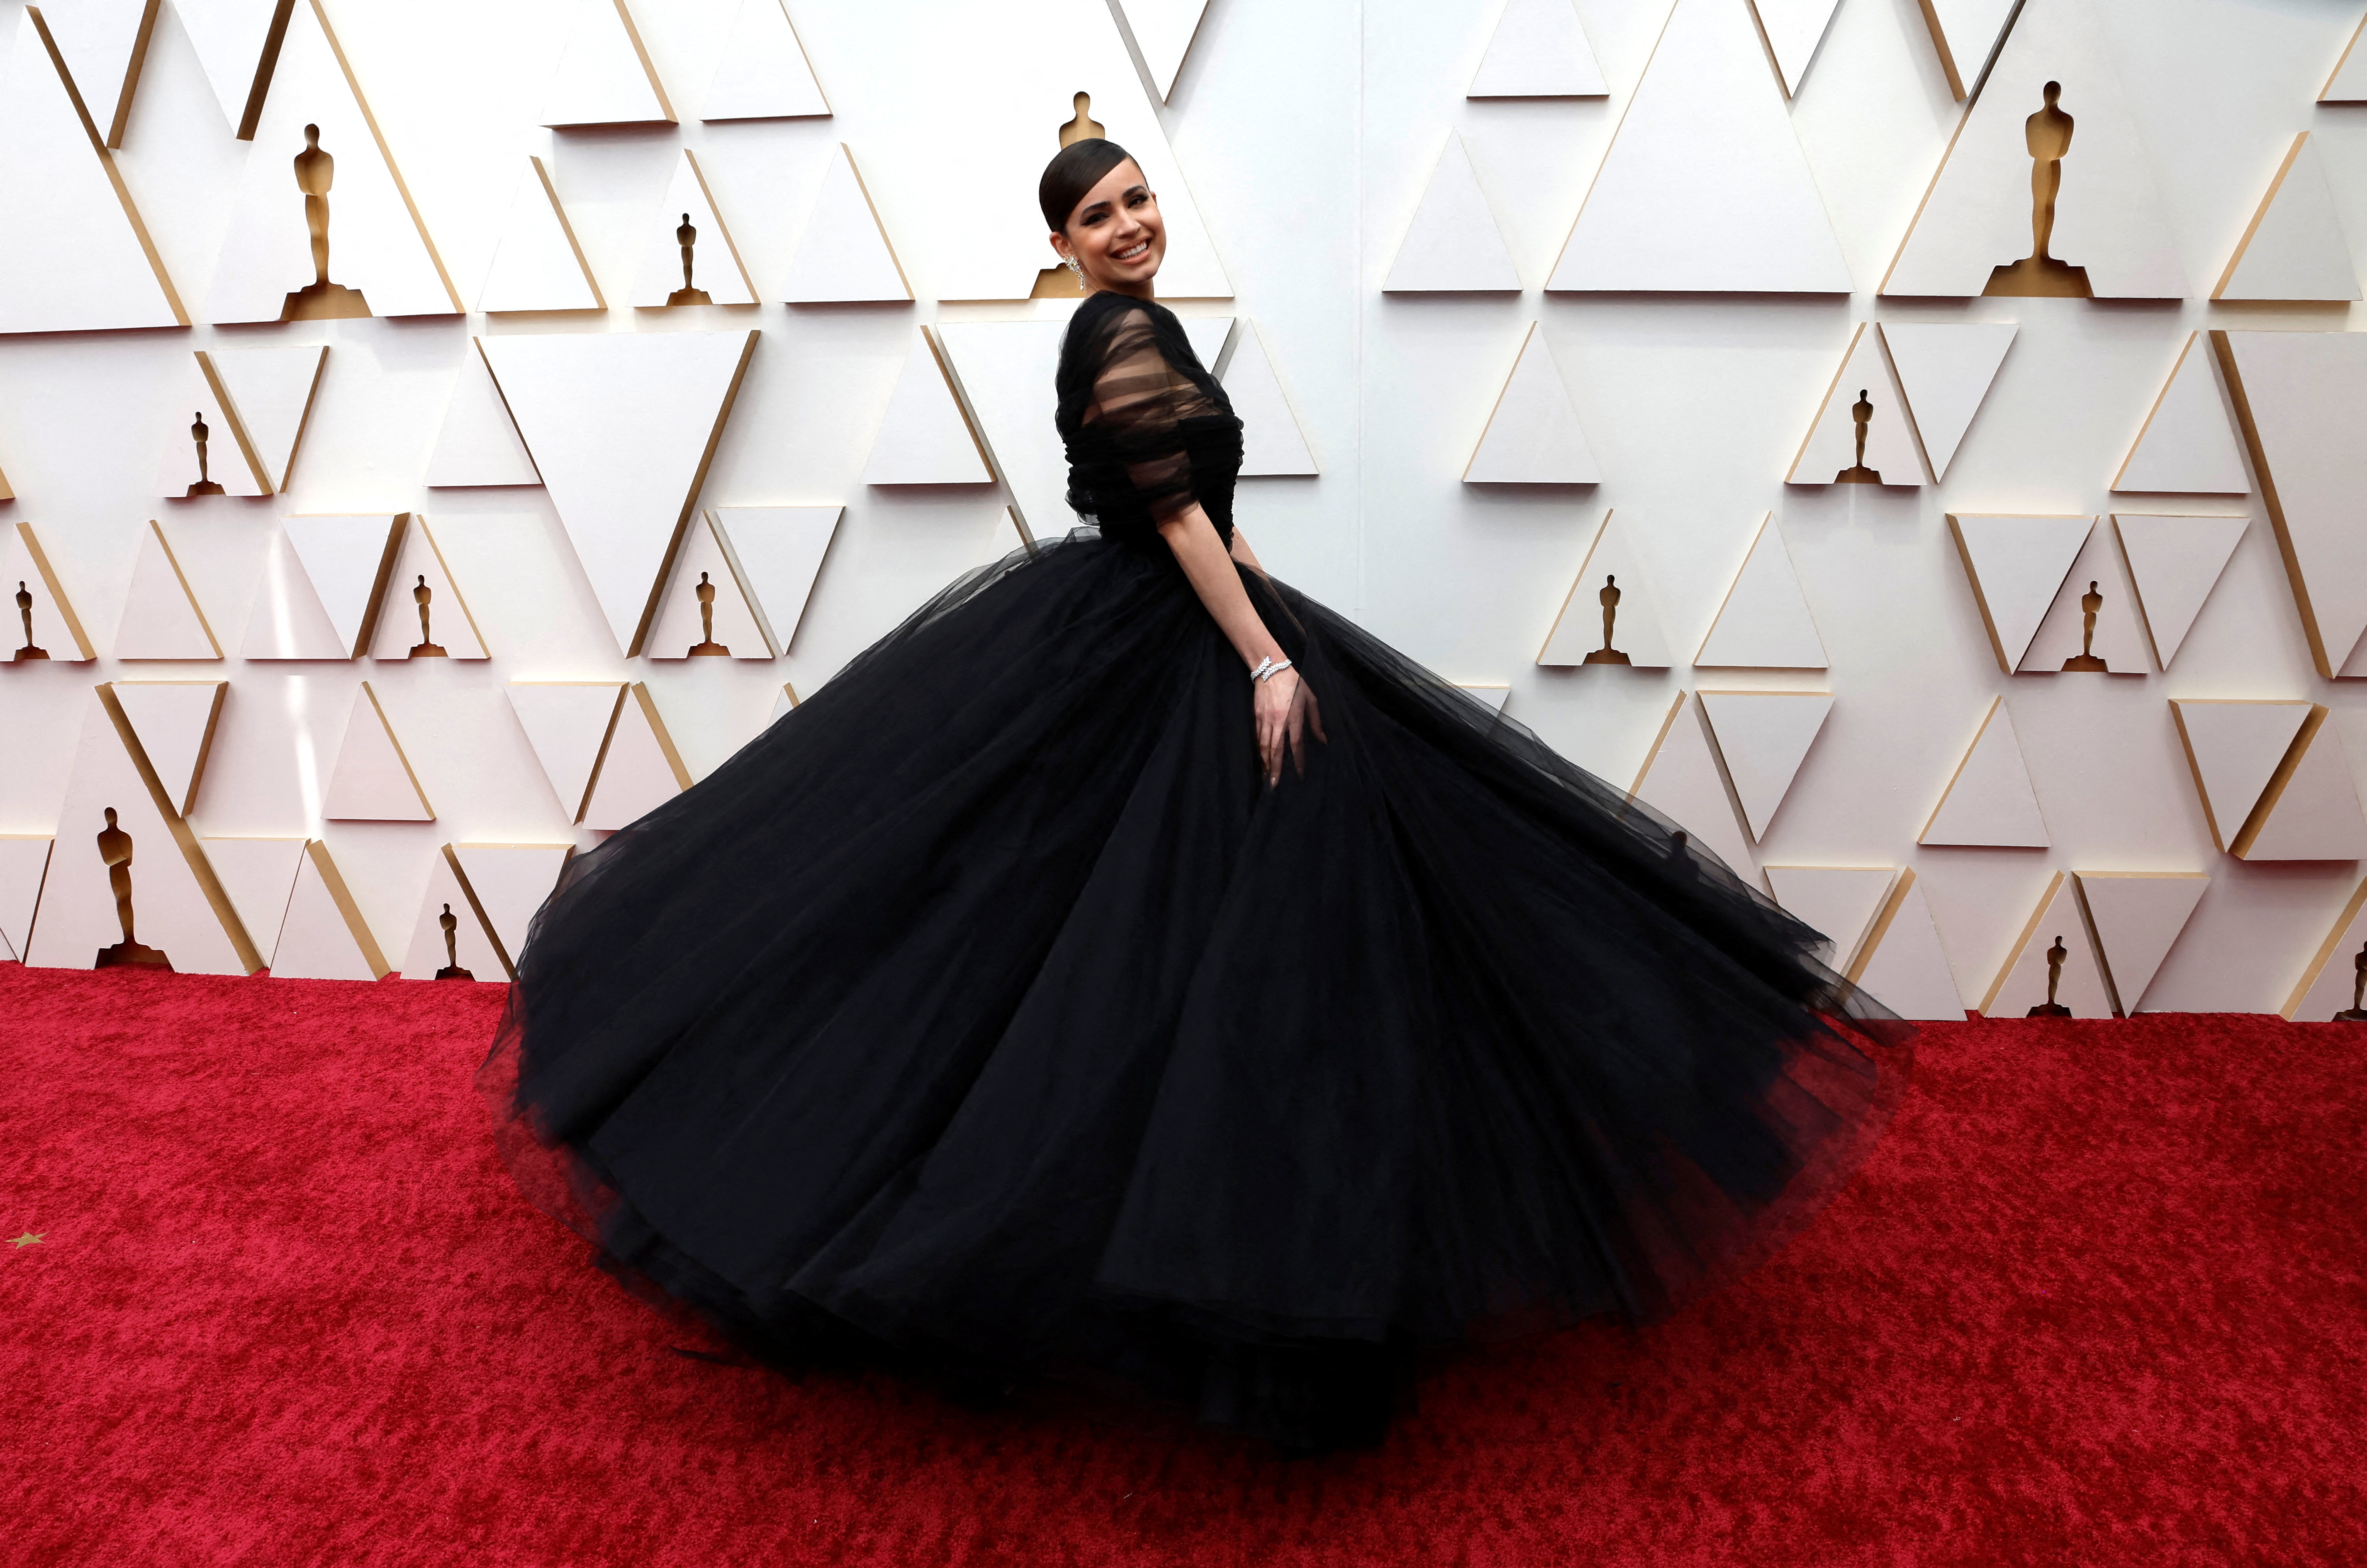 Sofia Carson poses on the red carpet during the Oscars arrivals at the 94th Academy Awards in Hollywood, Los Angeles, California, U.S., March 27, 2022. REUTERS/Eric Gaillard     TPX IMAGES OF THE DAY